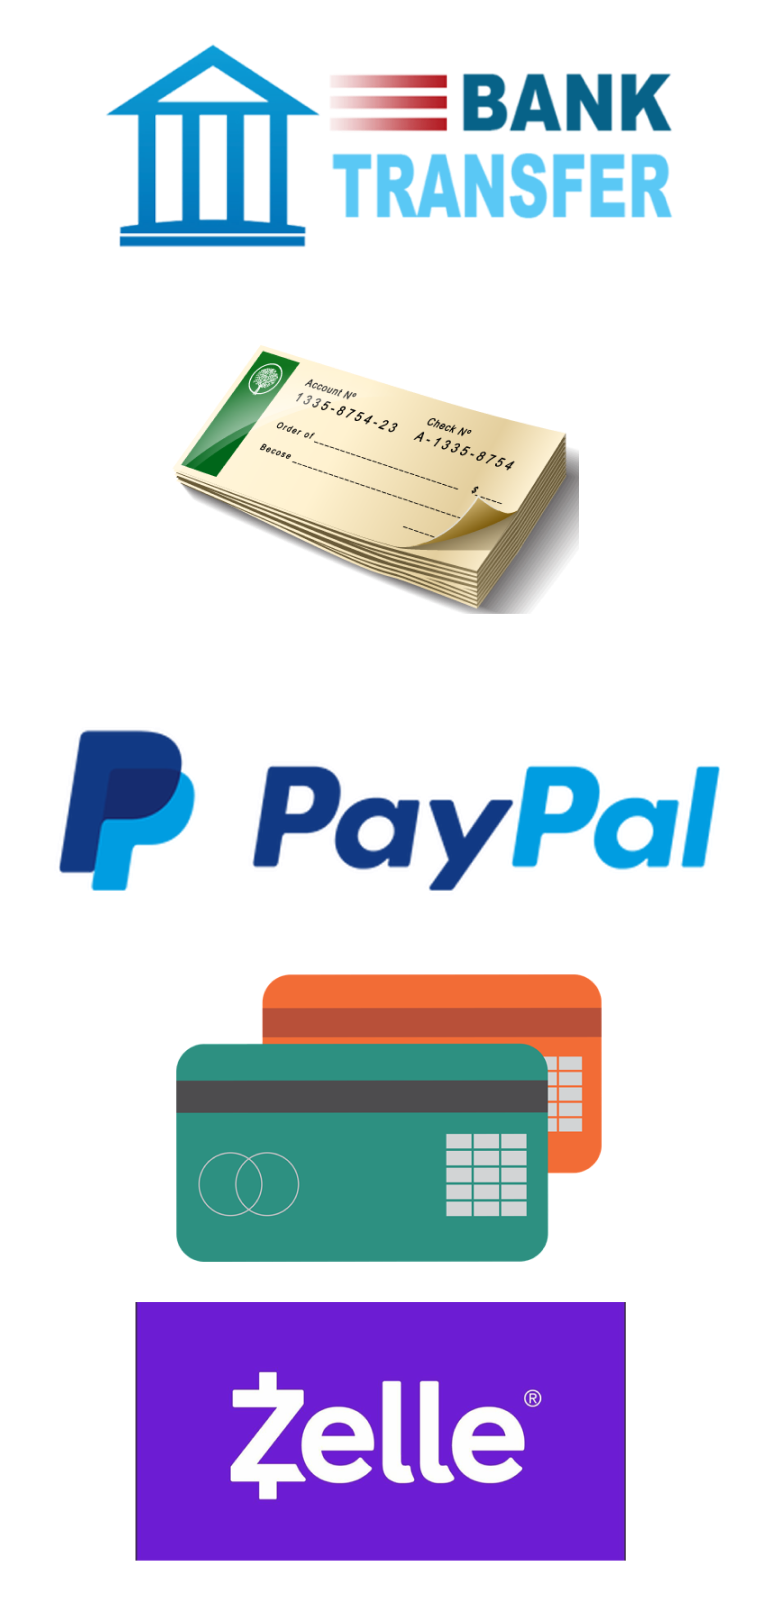 Pay online